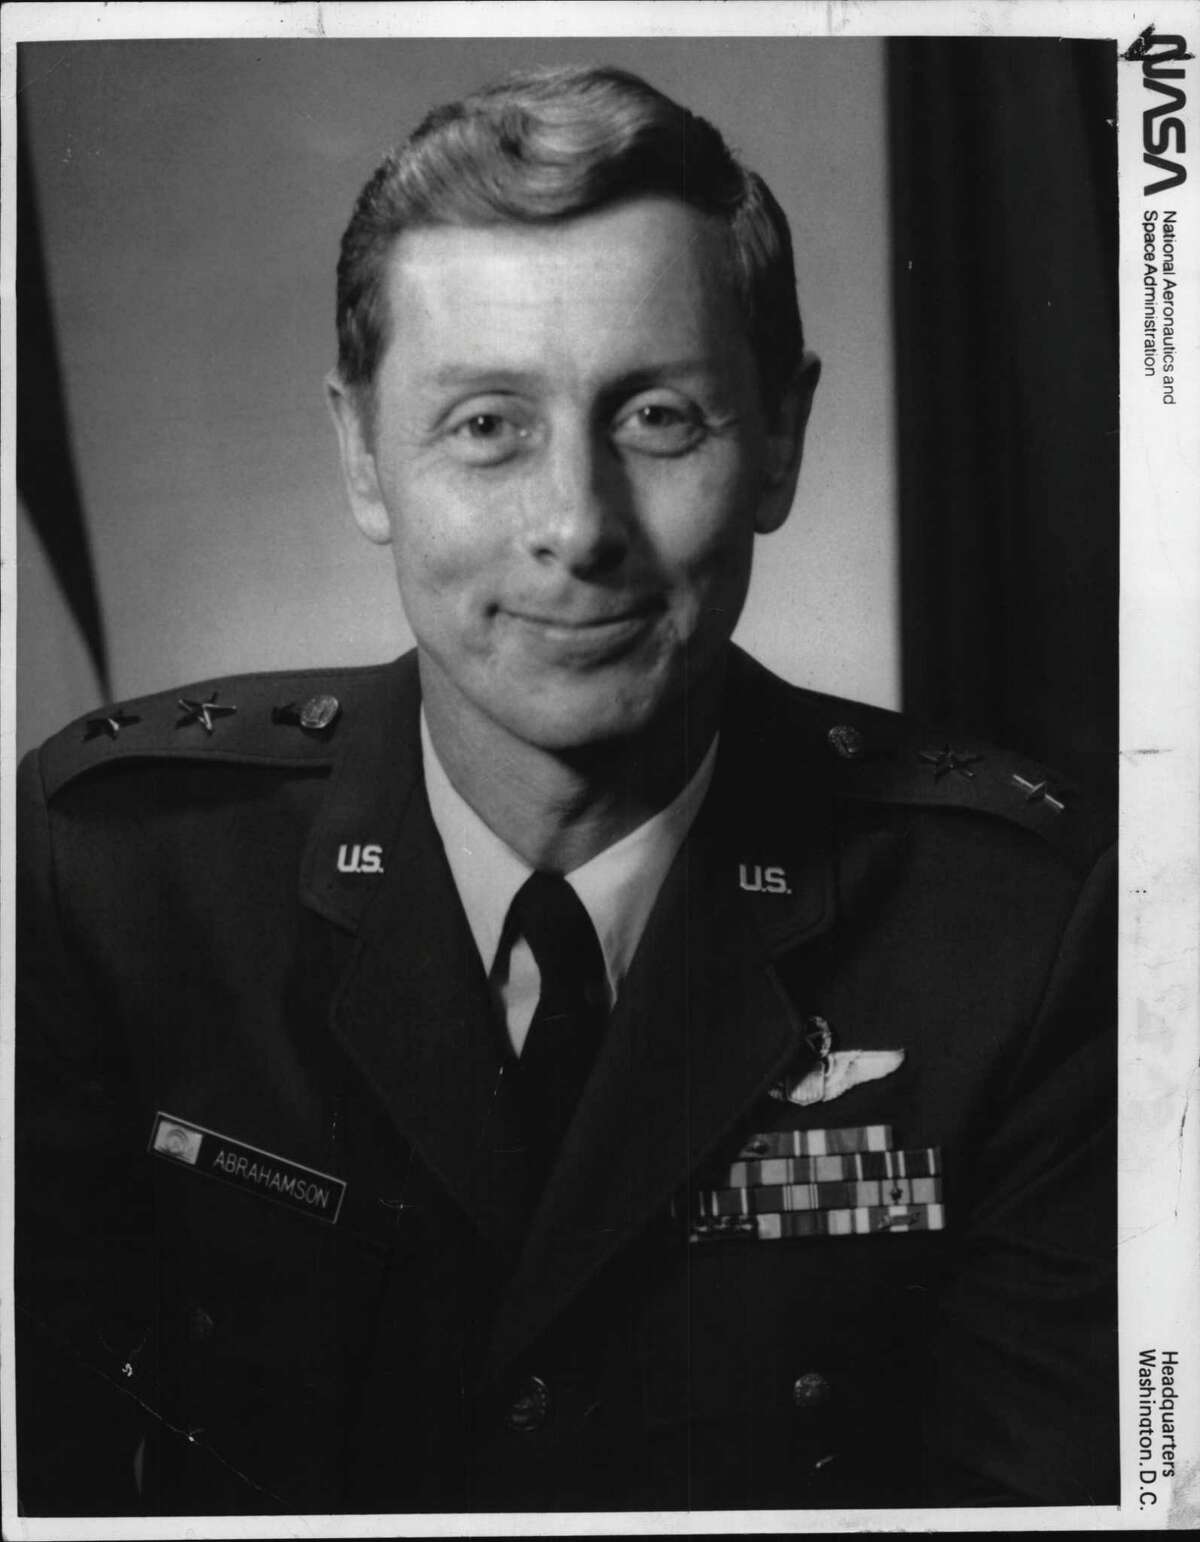 Lt. General James A. Abrahamson, director of Strategic Defense Initiatives, U.S. Dept. of Defense, was the commencement speaker for Rensselaer Polytechnic Institute in 1984 (Times Union Archive)